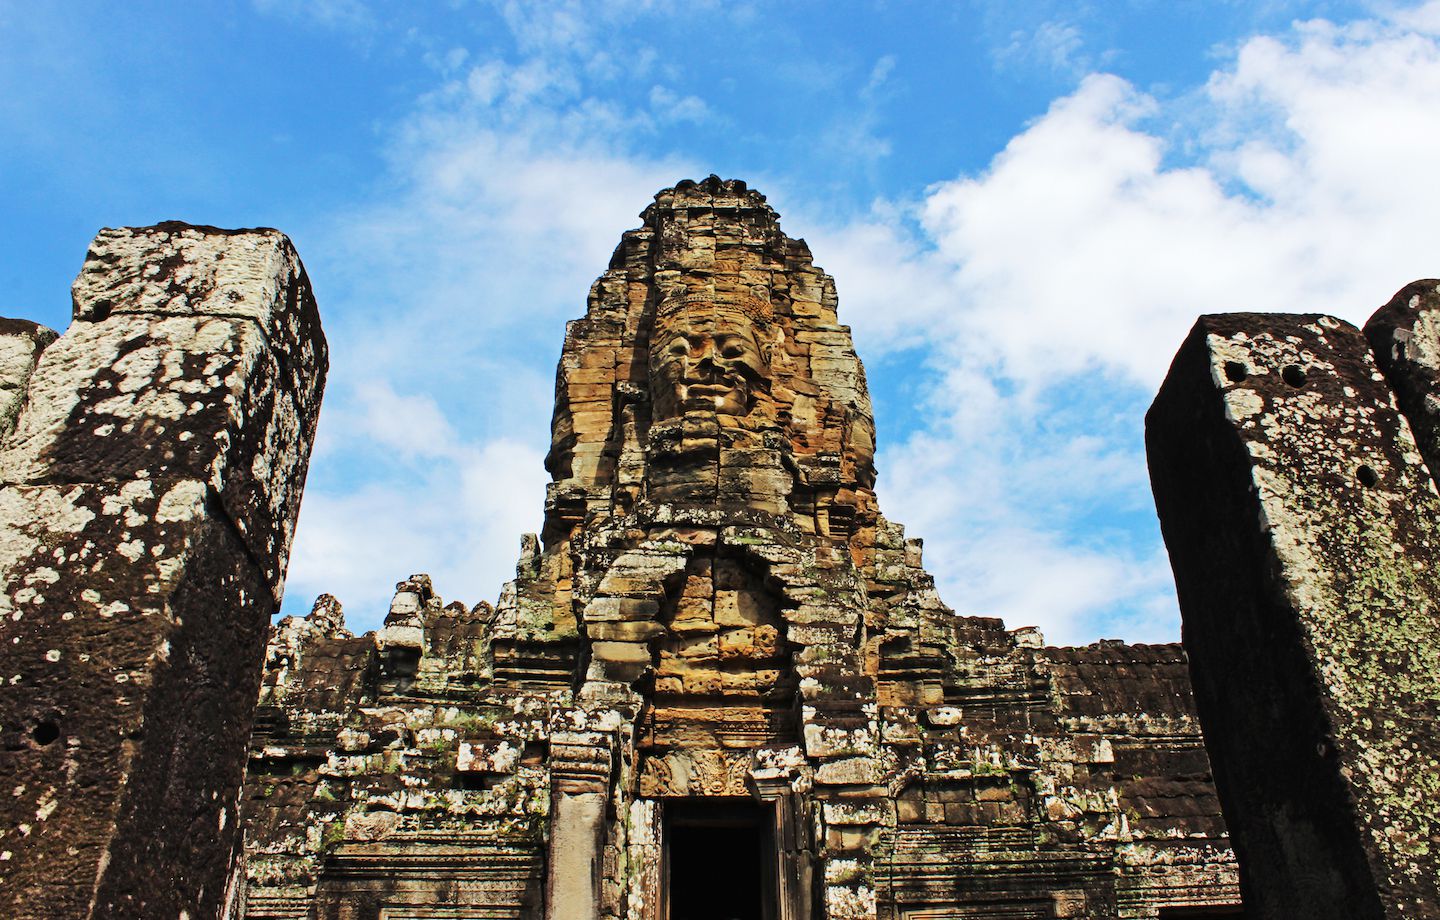 Door to the upper levels of the Bayon